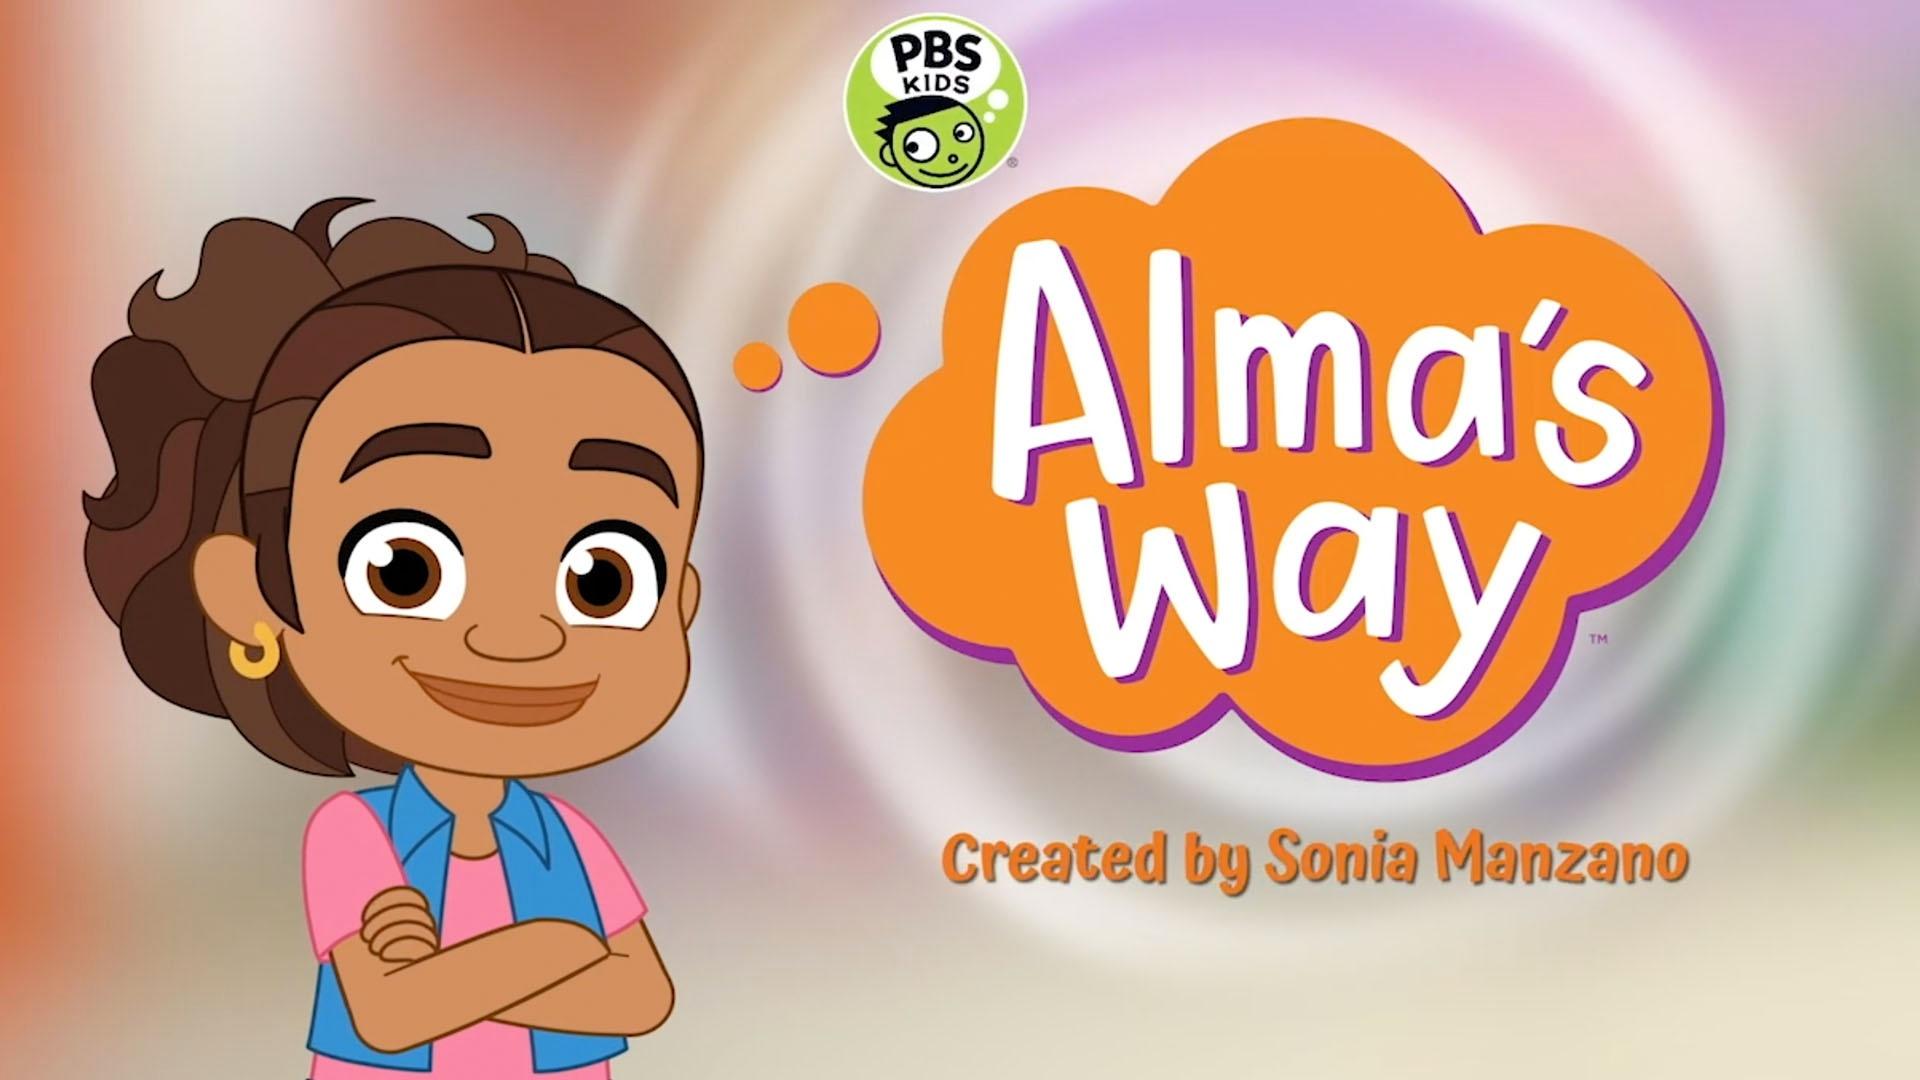 ALMA’S WAY Arrives on PBS, Landon Forlenza Books Feature Film, and more!